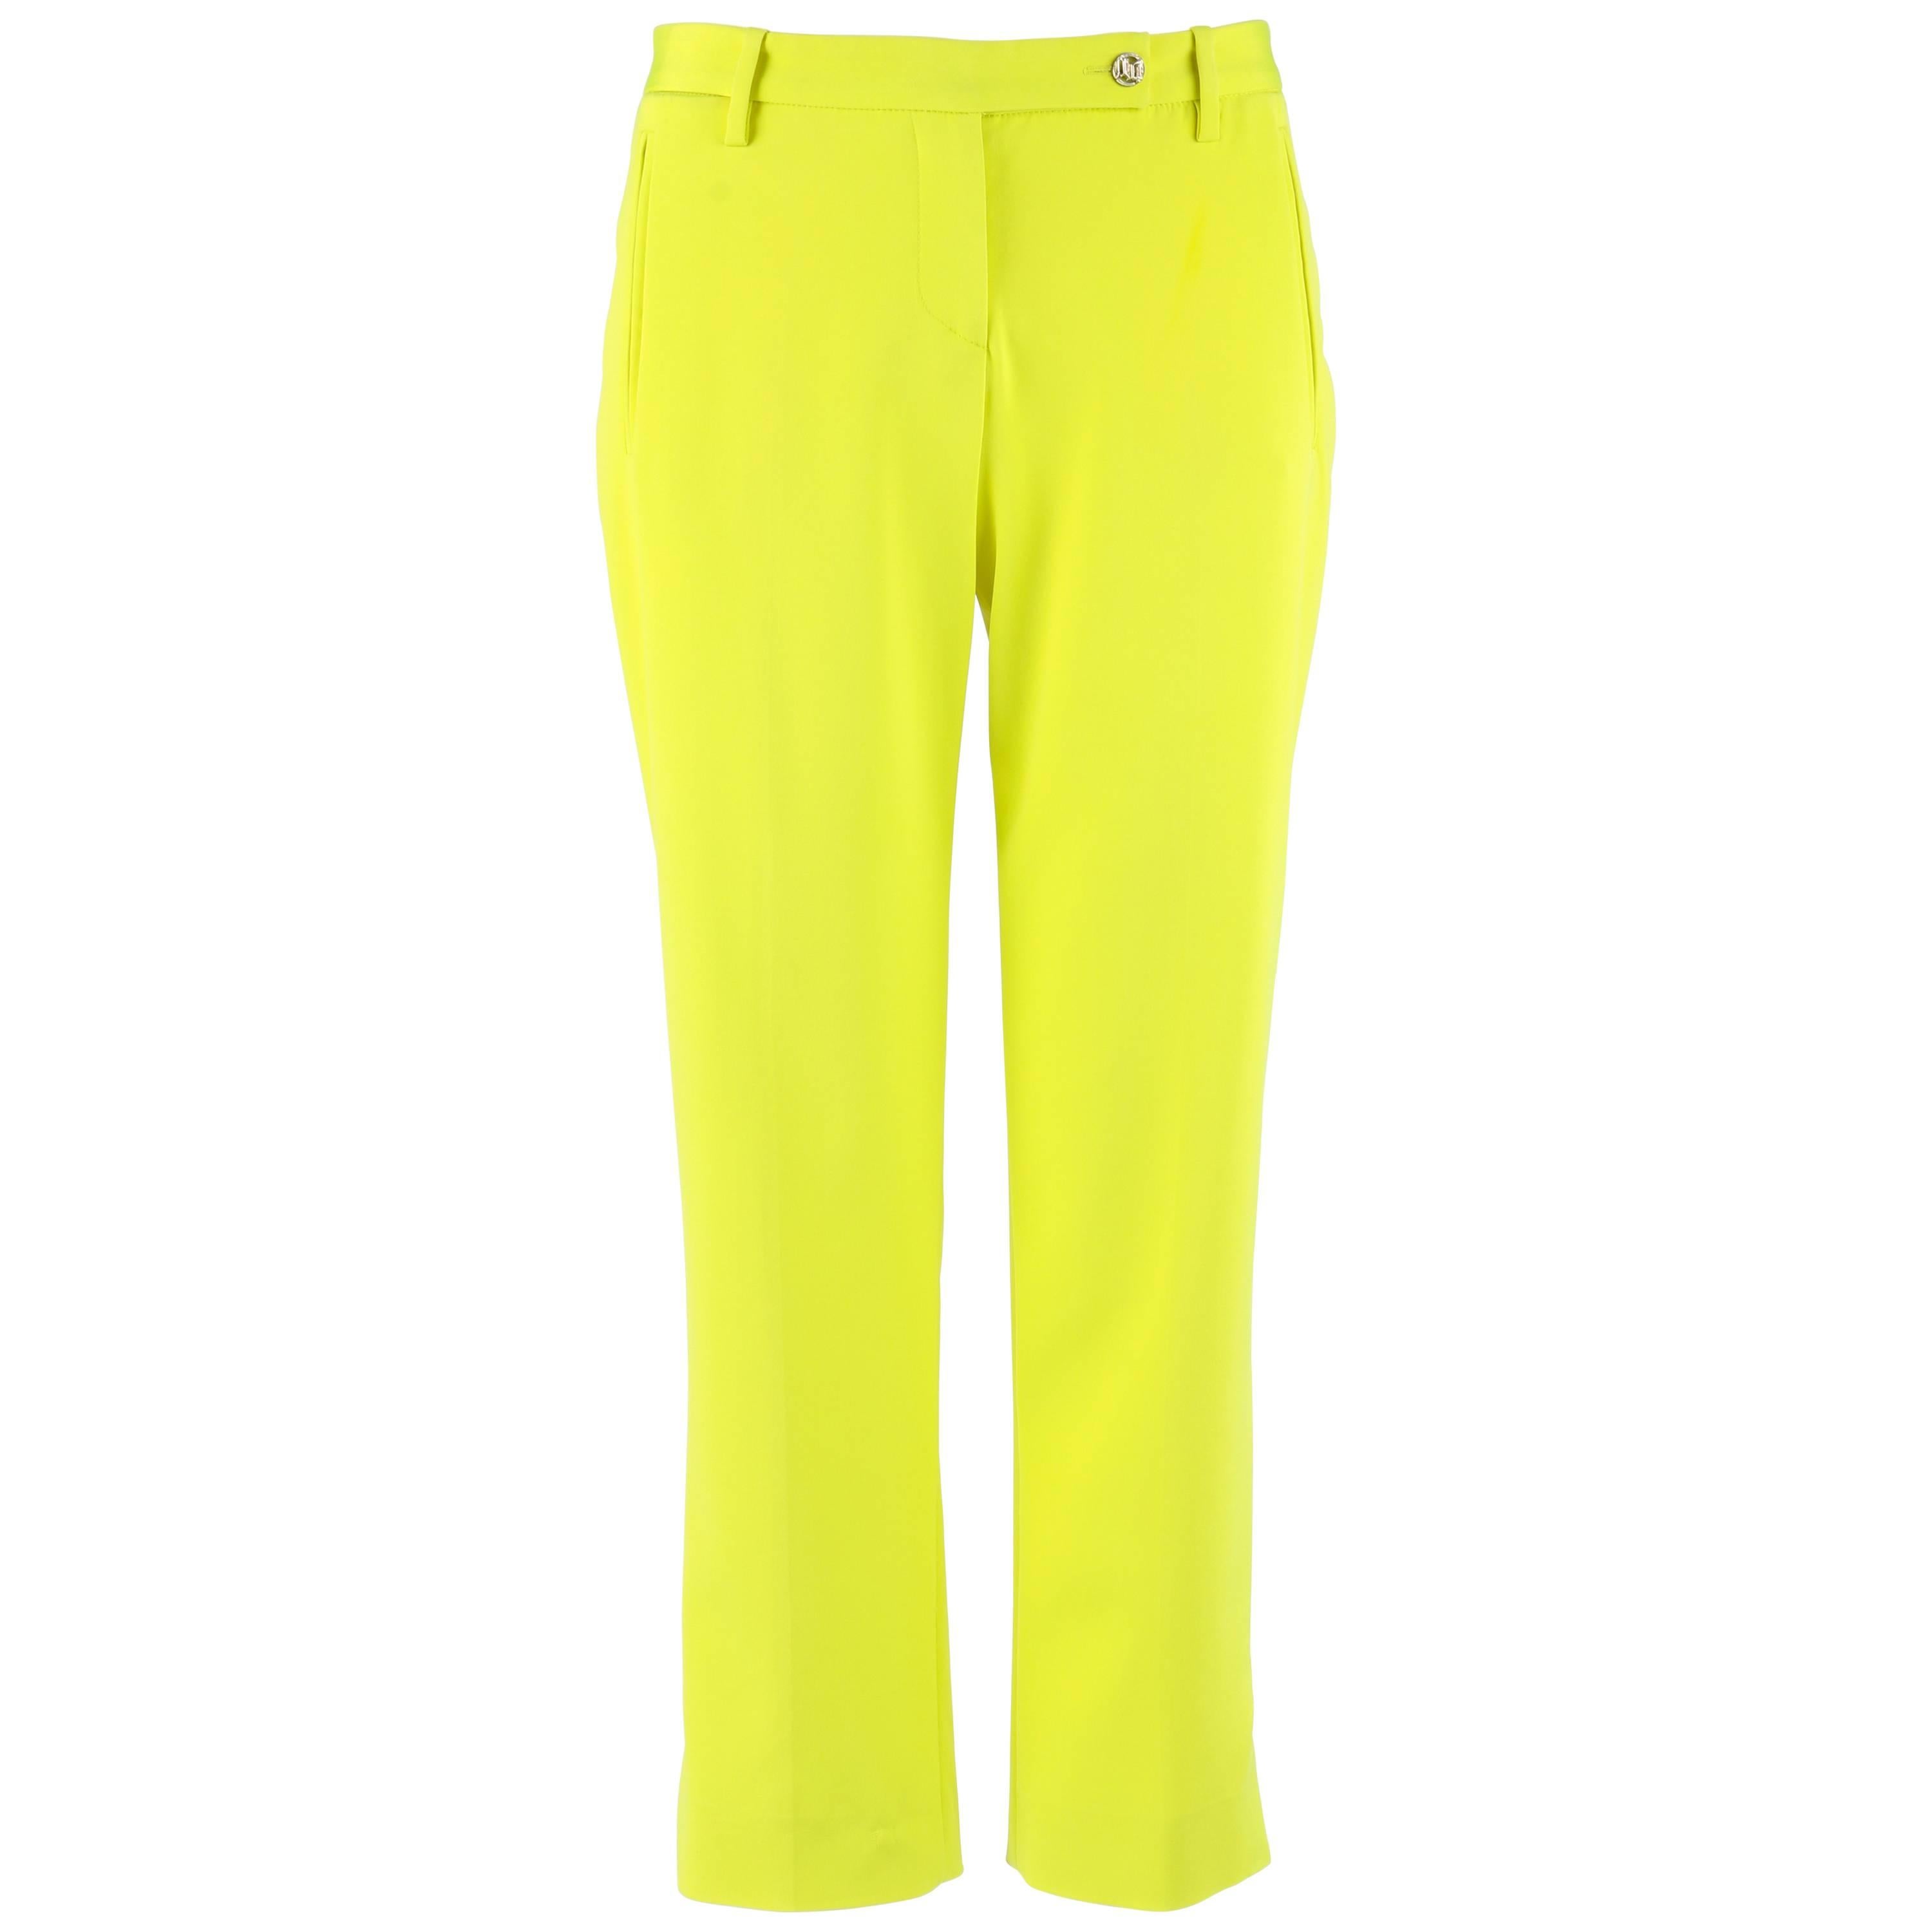 VERSACE S/S 2004 Neon Yellow Silk Cropped Capri Ankle Length Trouser Pants NWT